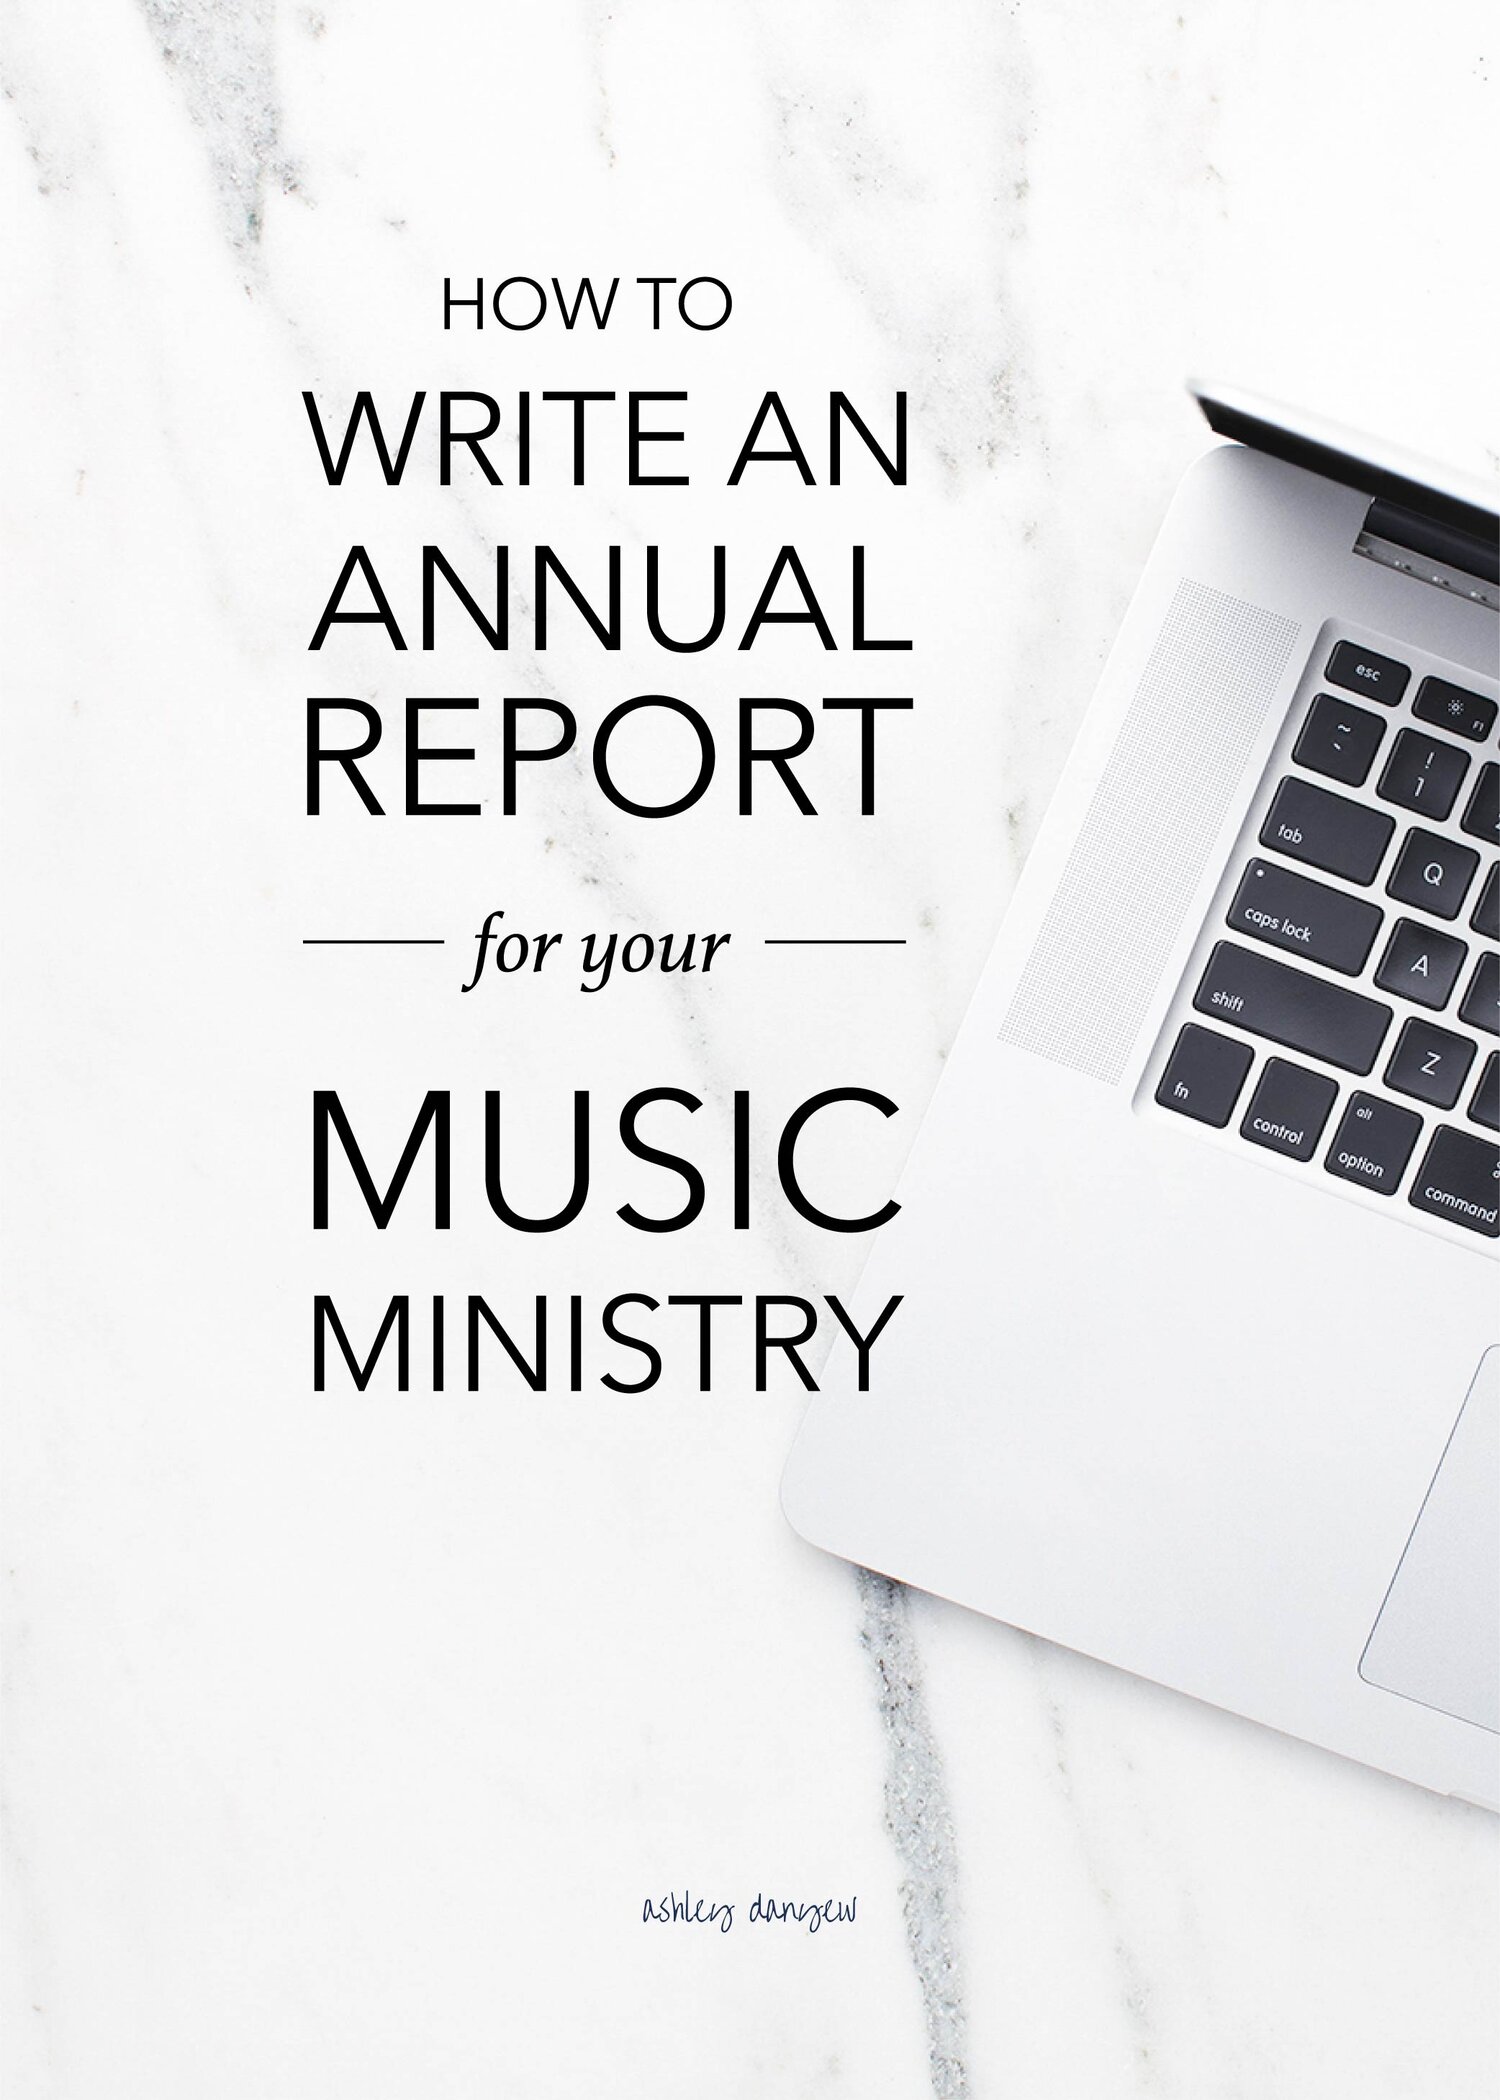 How to Write an Annual Report for Your Music Ministry  Ashley Danyew